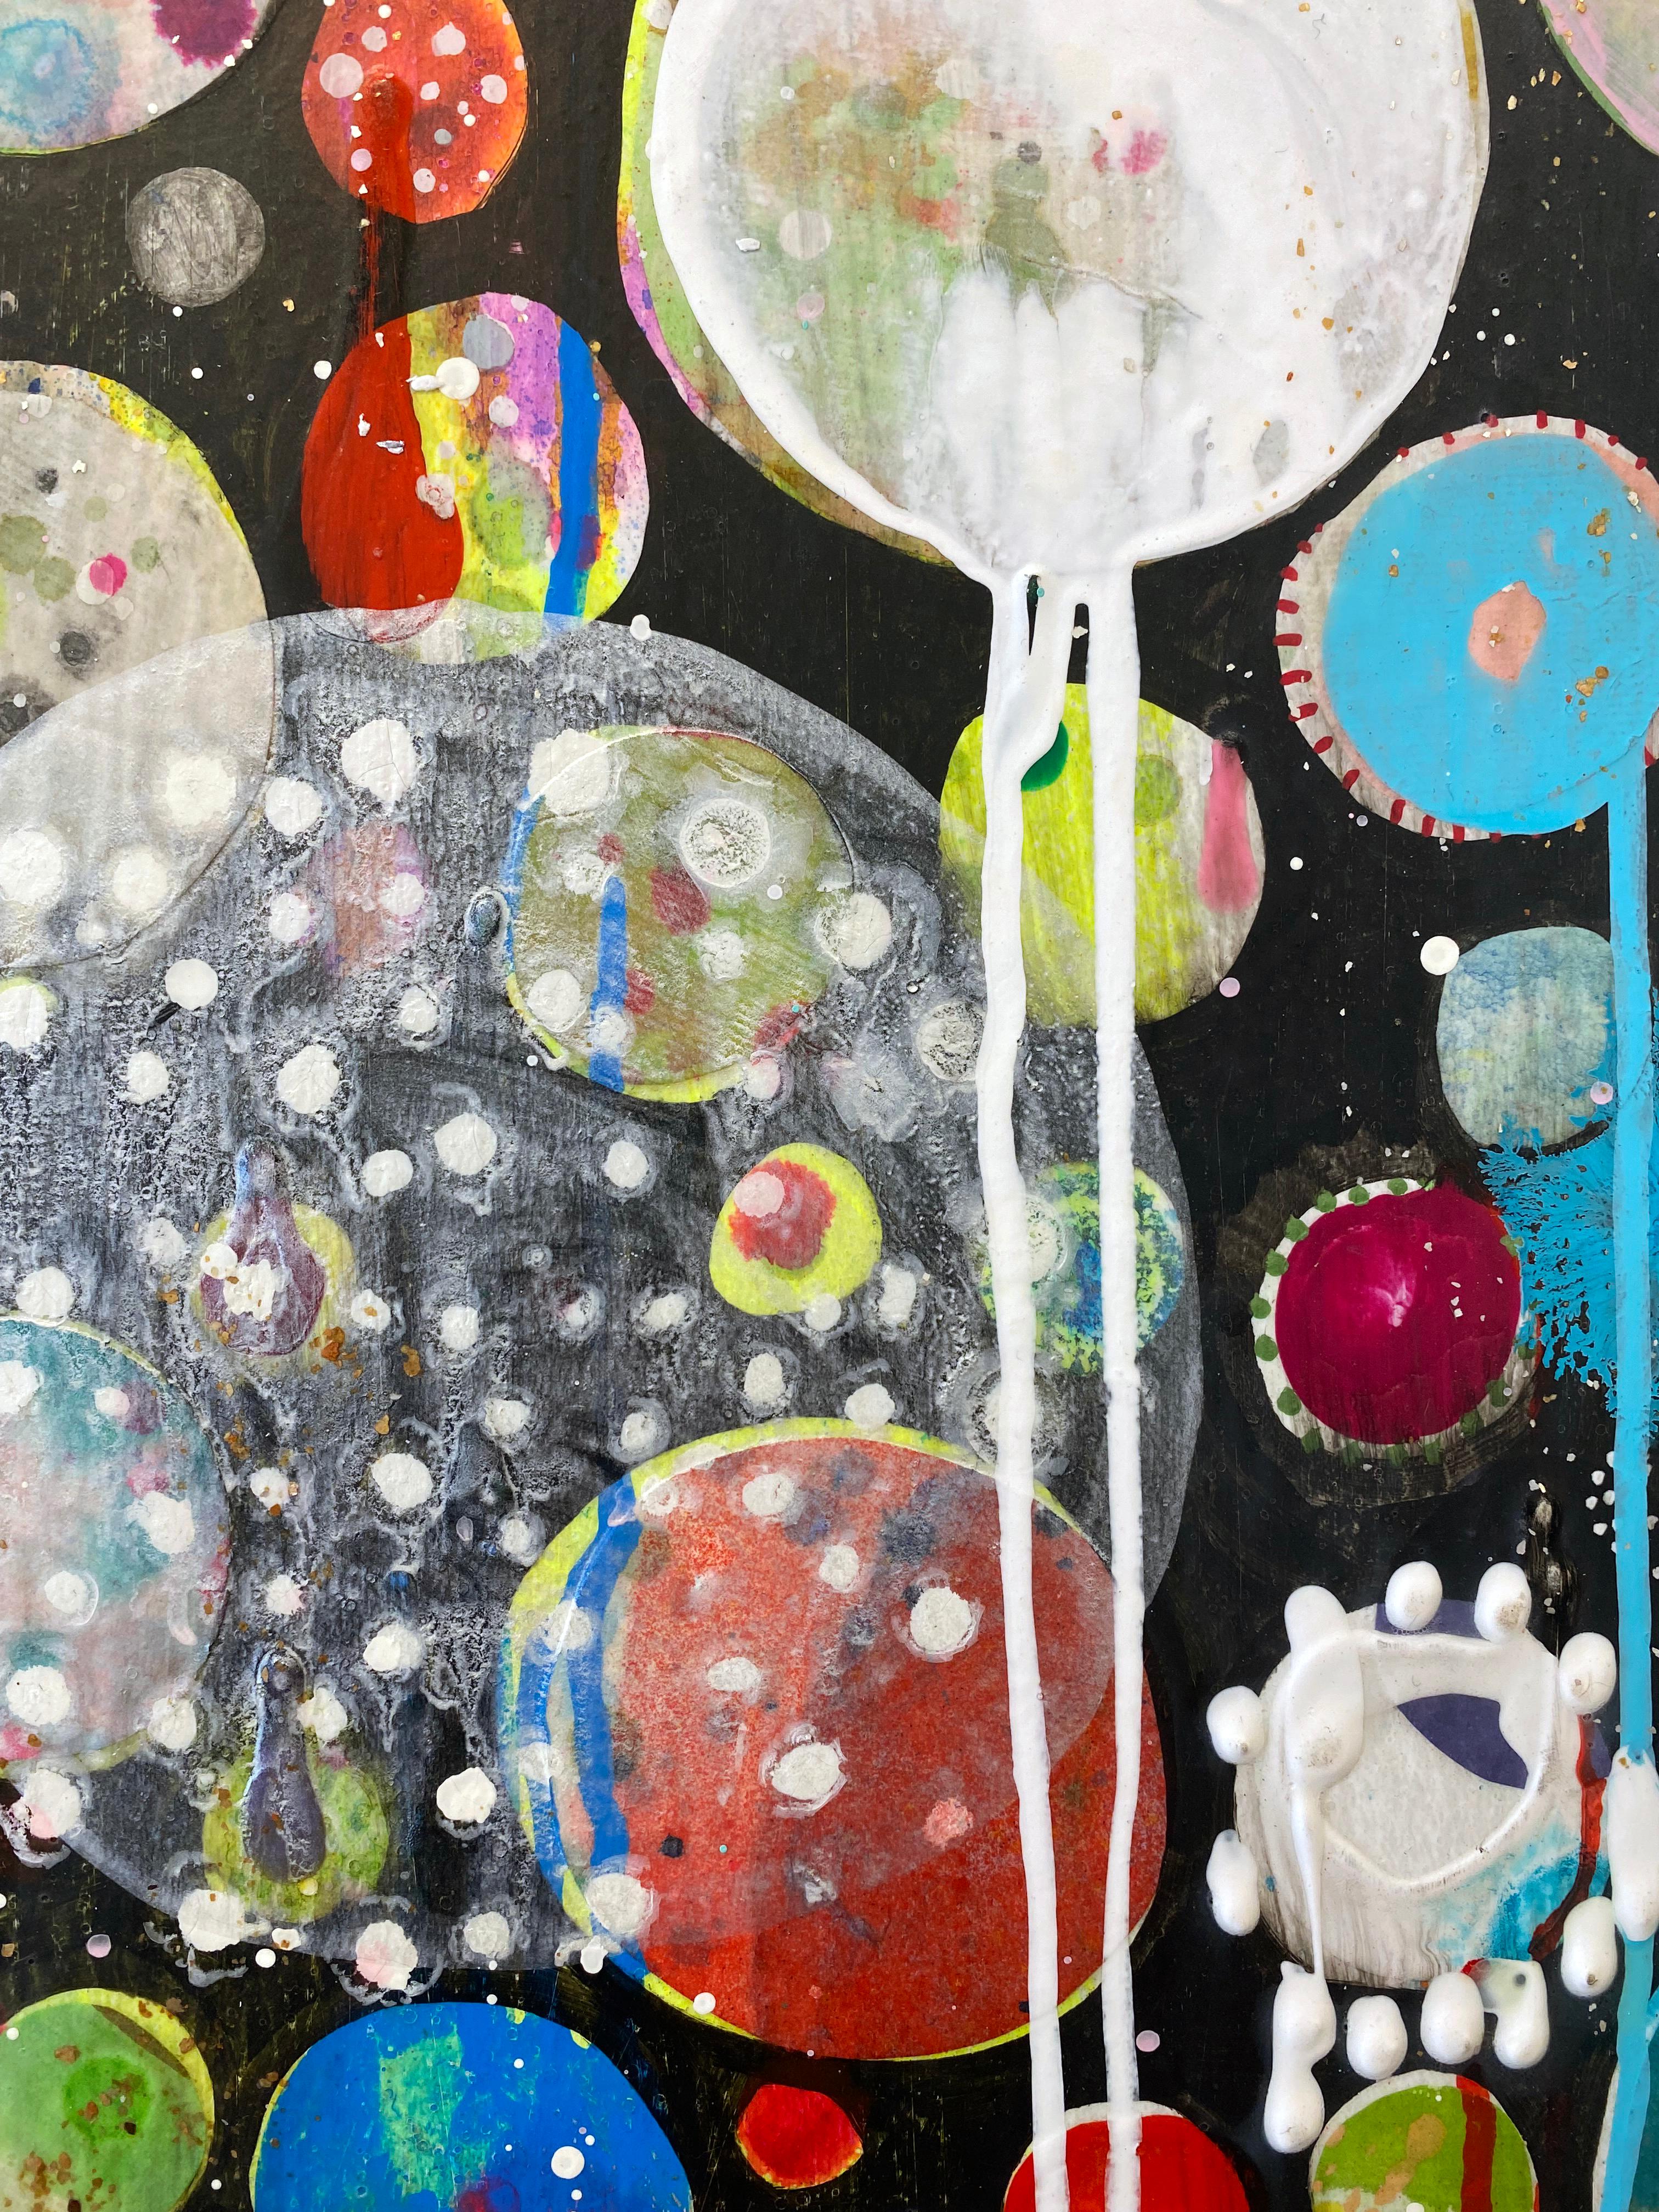 Abstract, Colorful Mixed Media Painting by Liz Tran 'Perseid I' 5